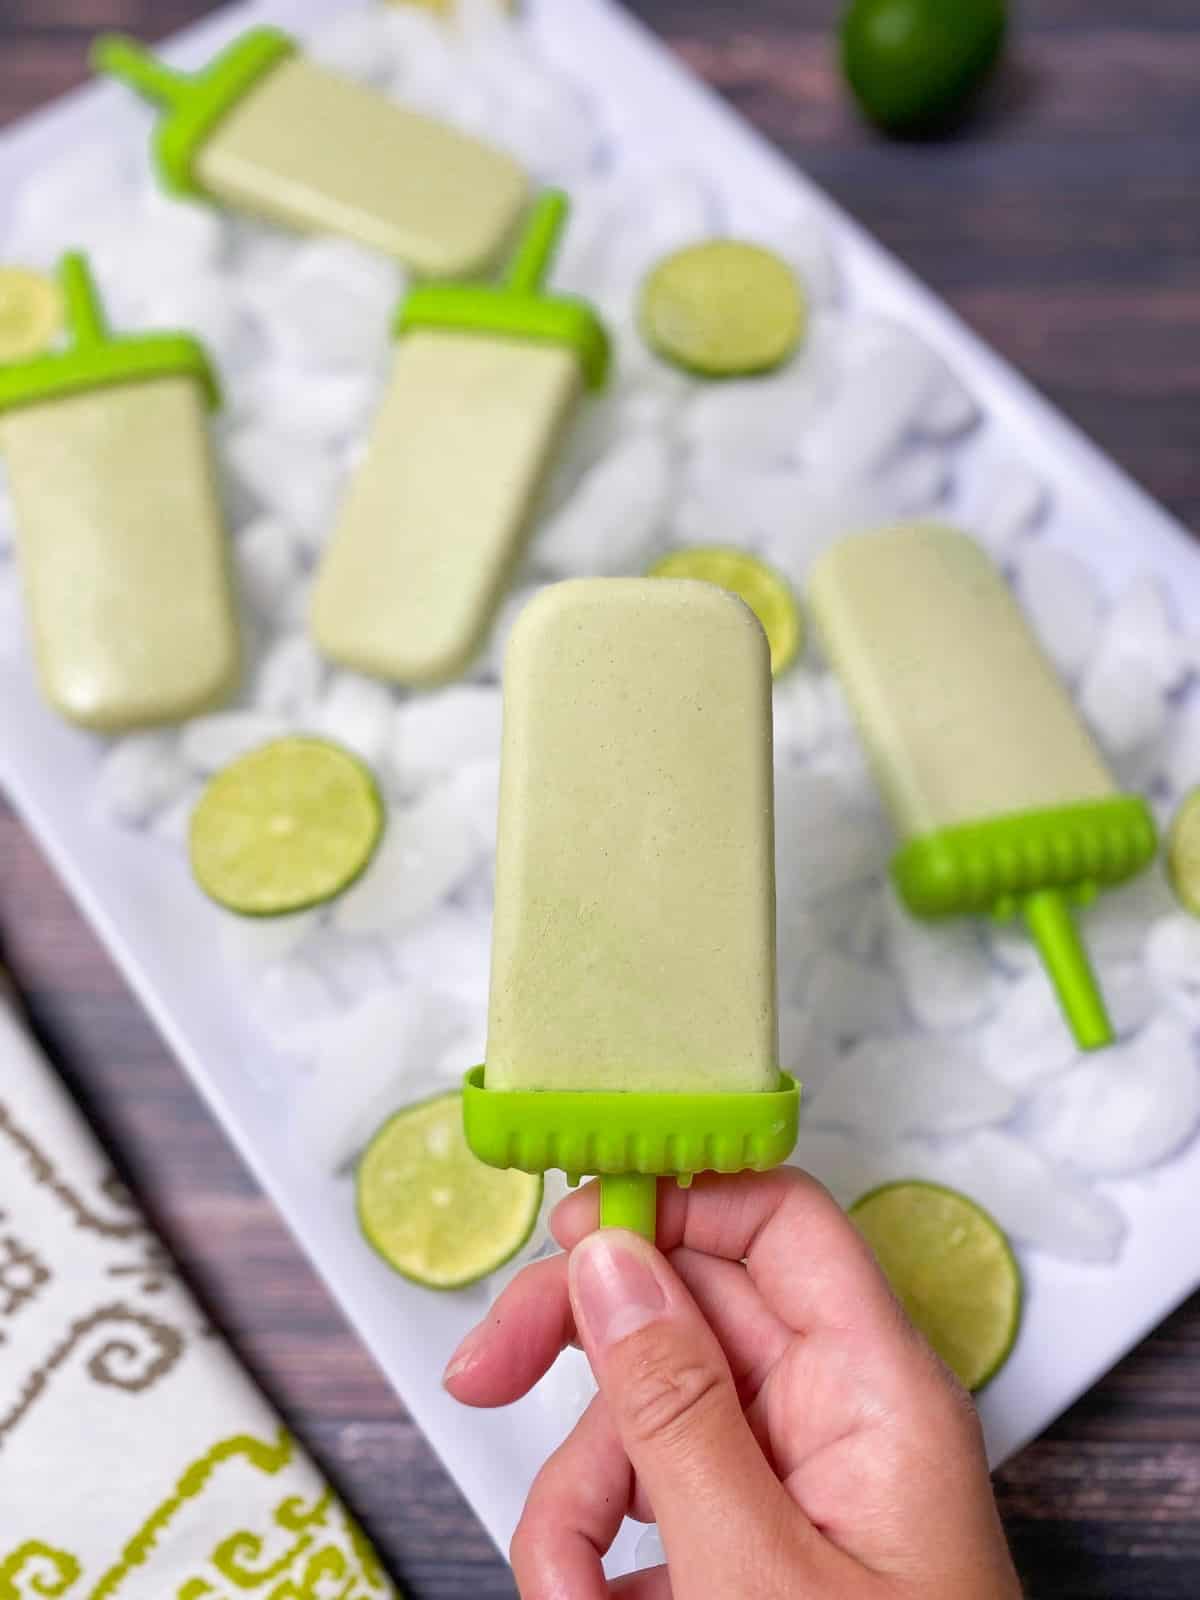 hand holding up lime popsicle with tray of ice and popsicles in the background